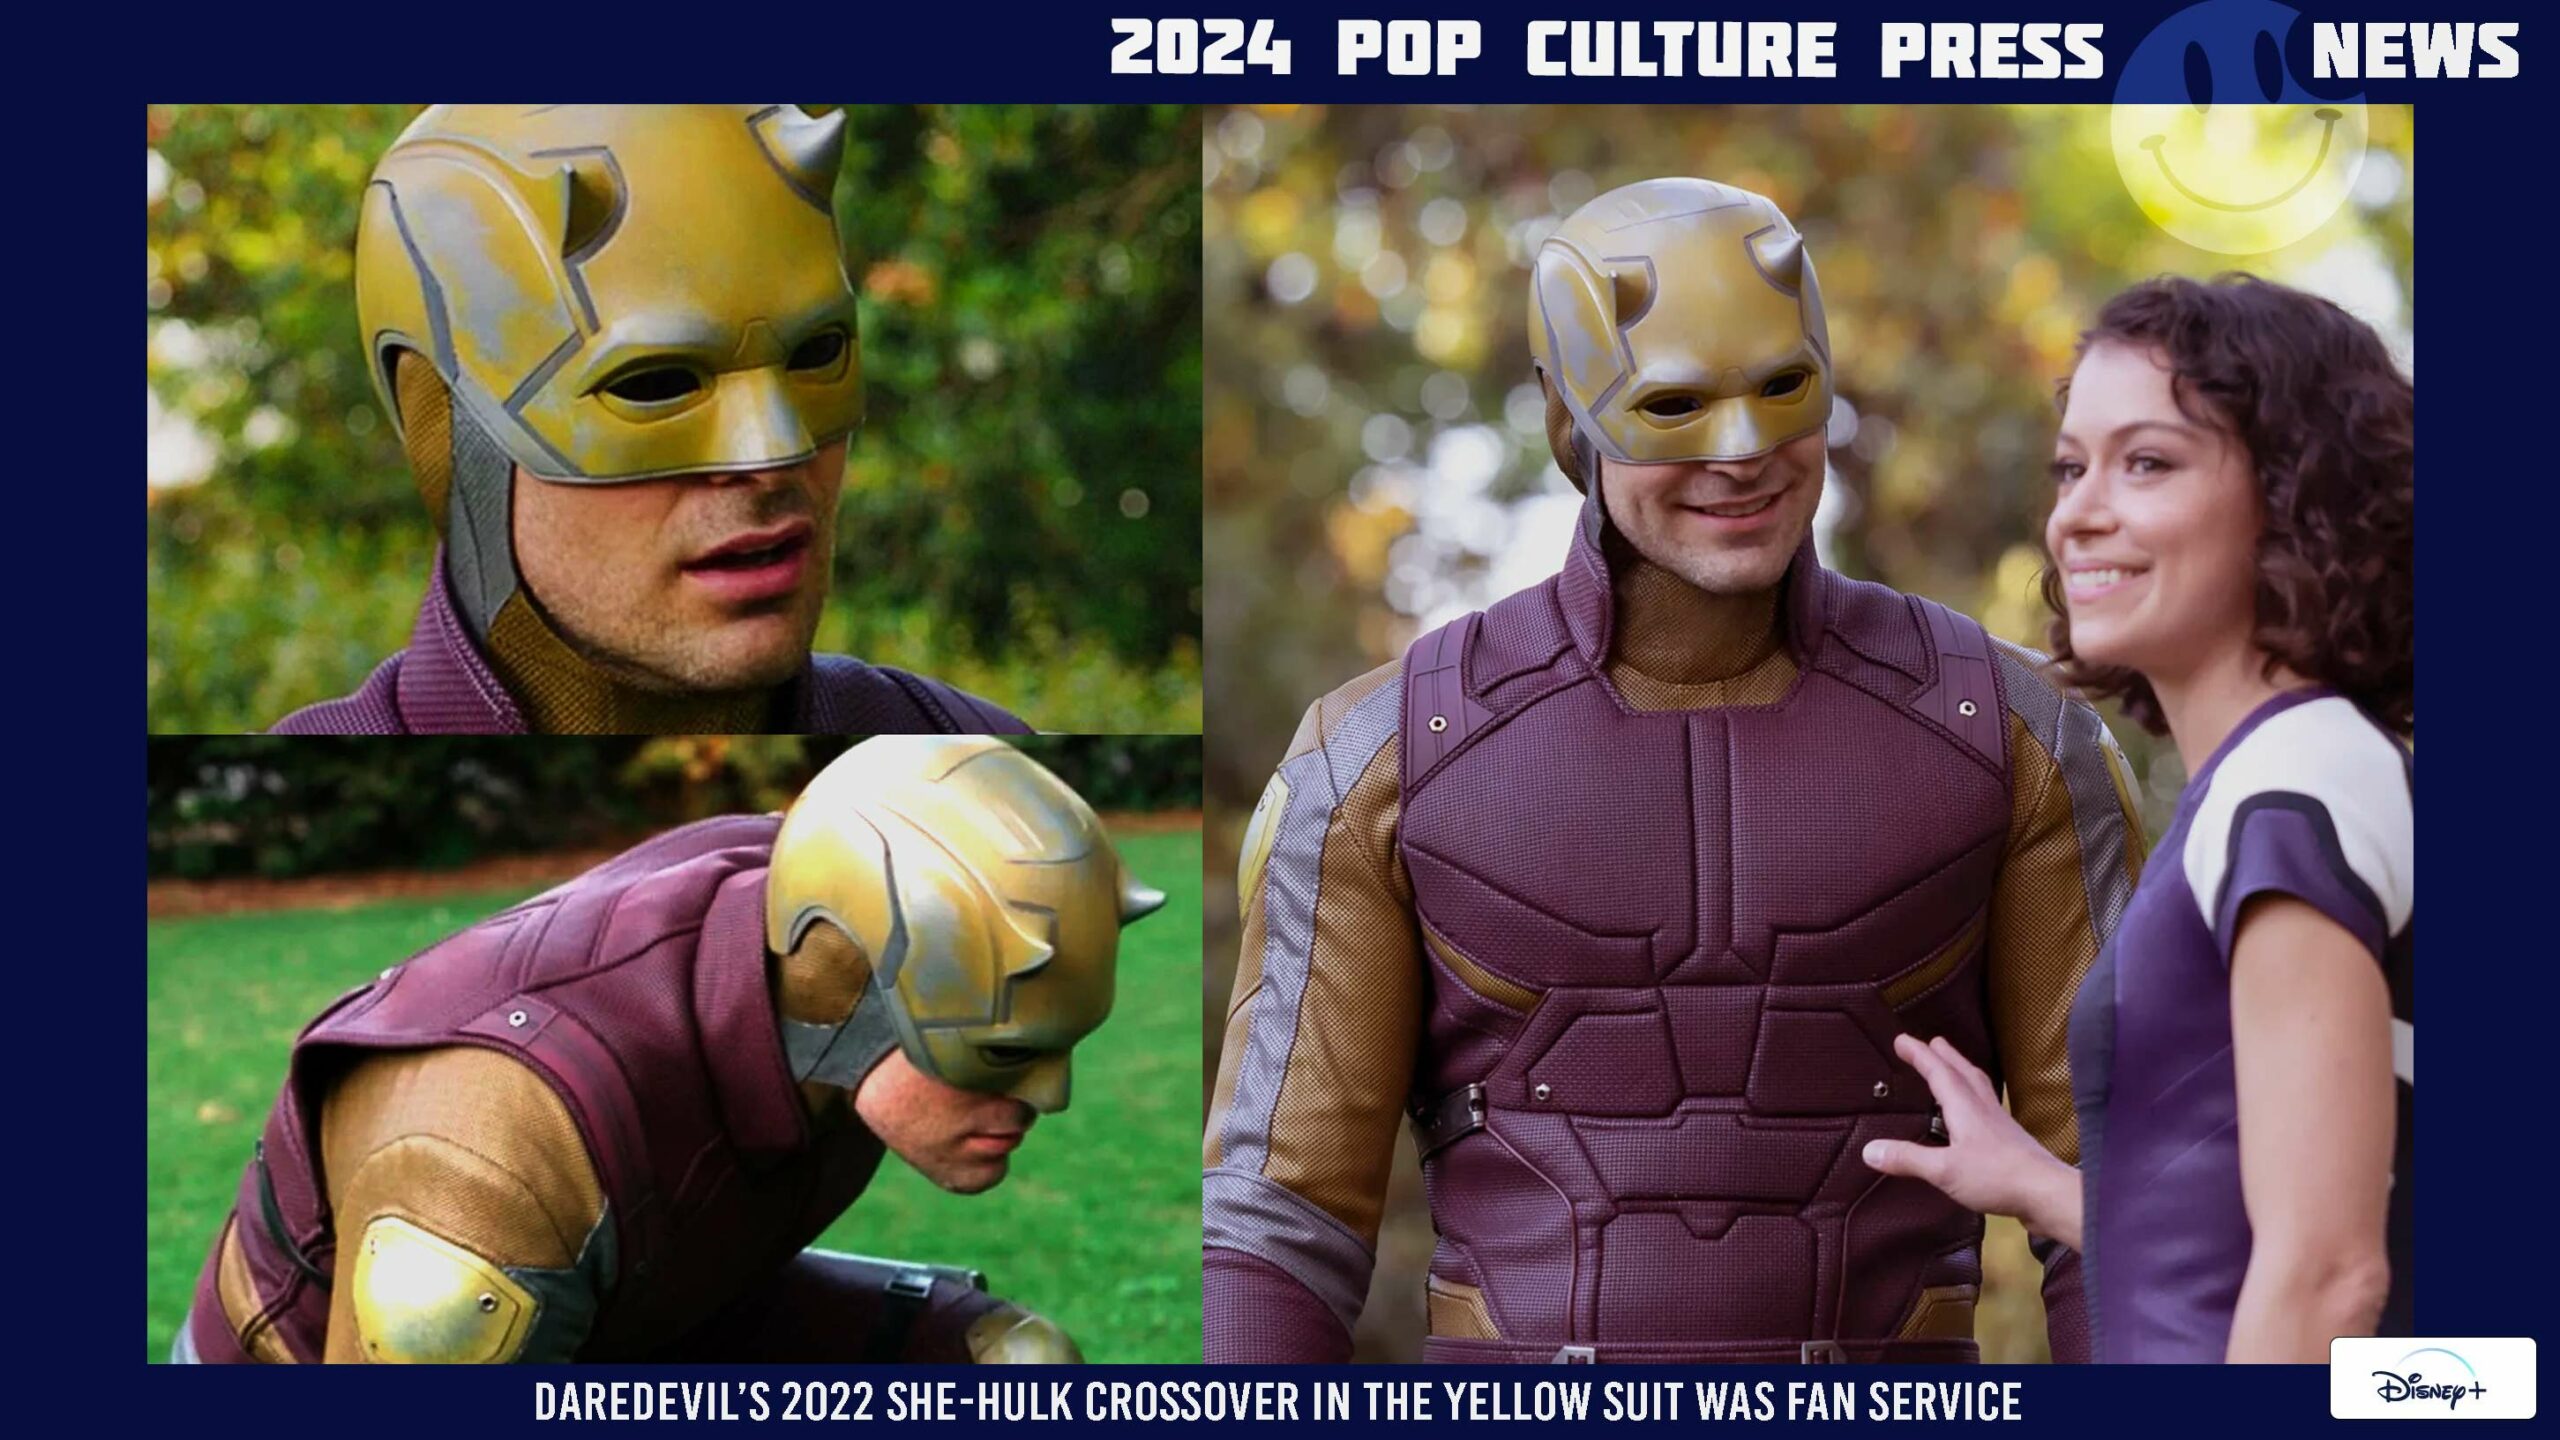 Montage of Daredevil in Yellow Suit from Disney Plus series, featuring crossover episode She-Hulk #8 'Ribbit and Rip It', and his mission with Luke Cage